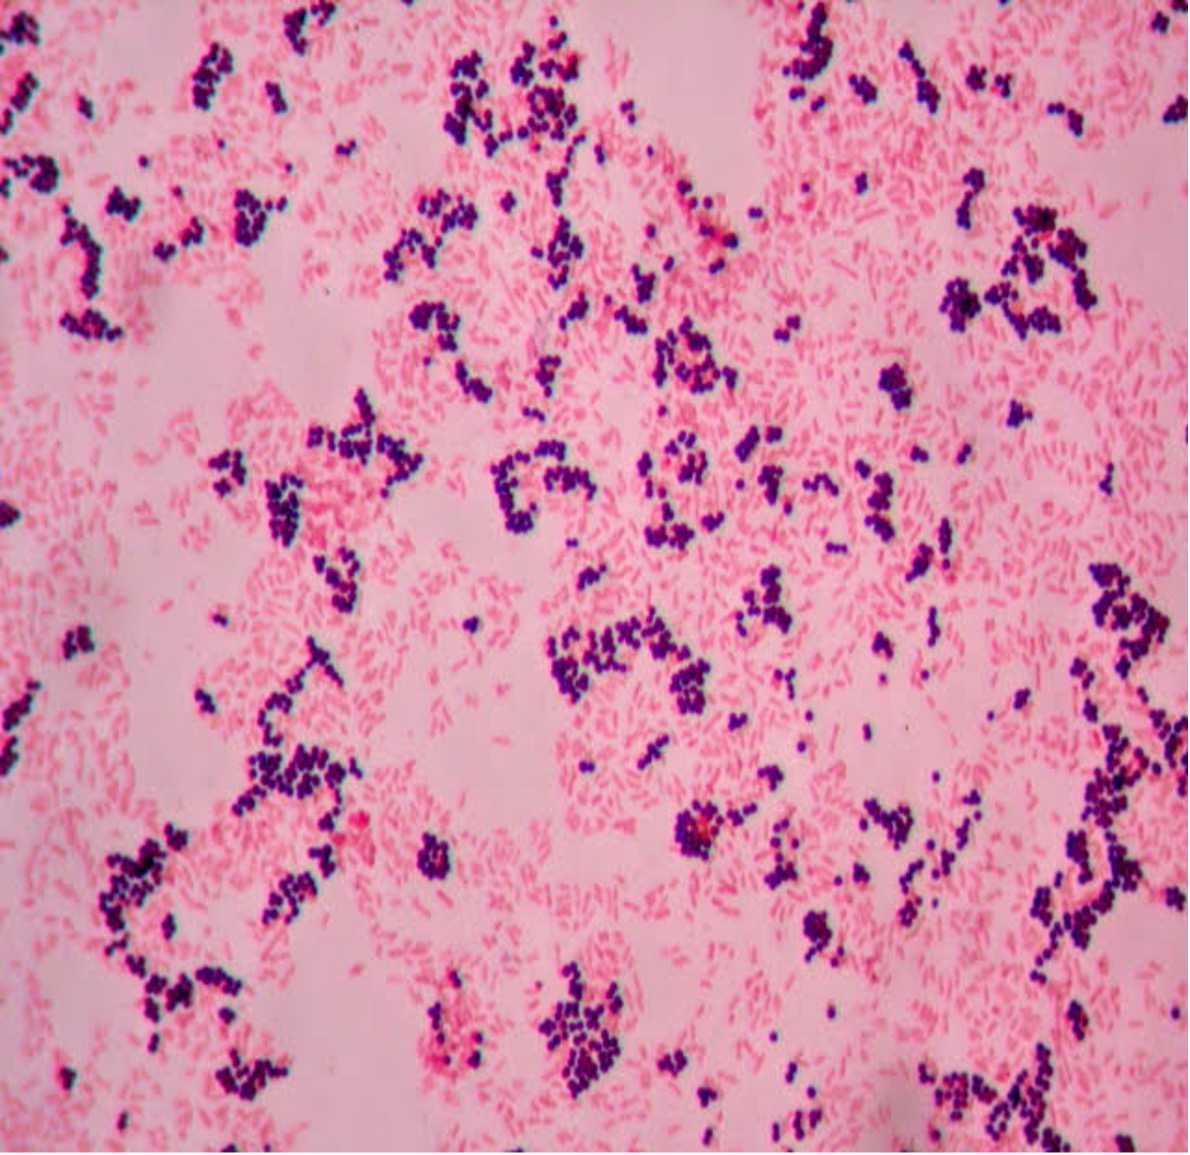 Exercise 9.4 Gram stain - purple round and pink rod